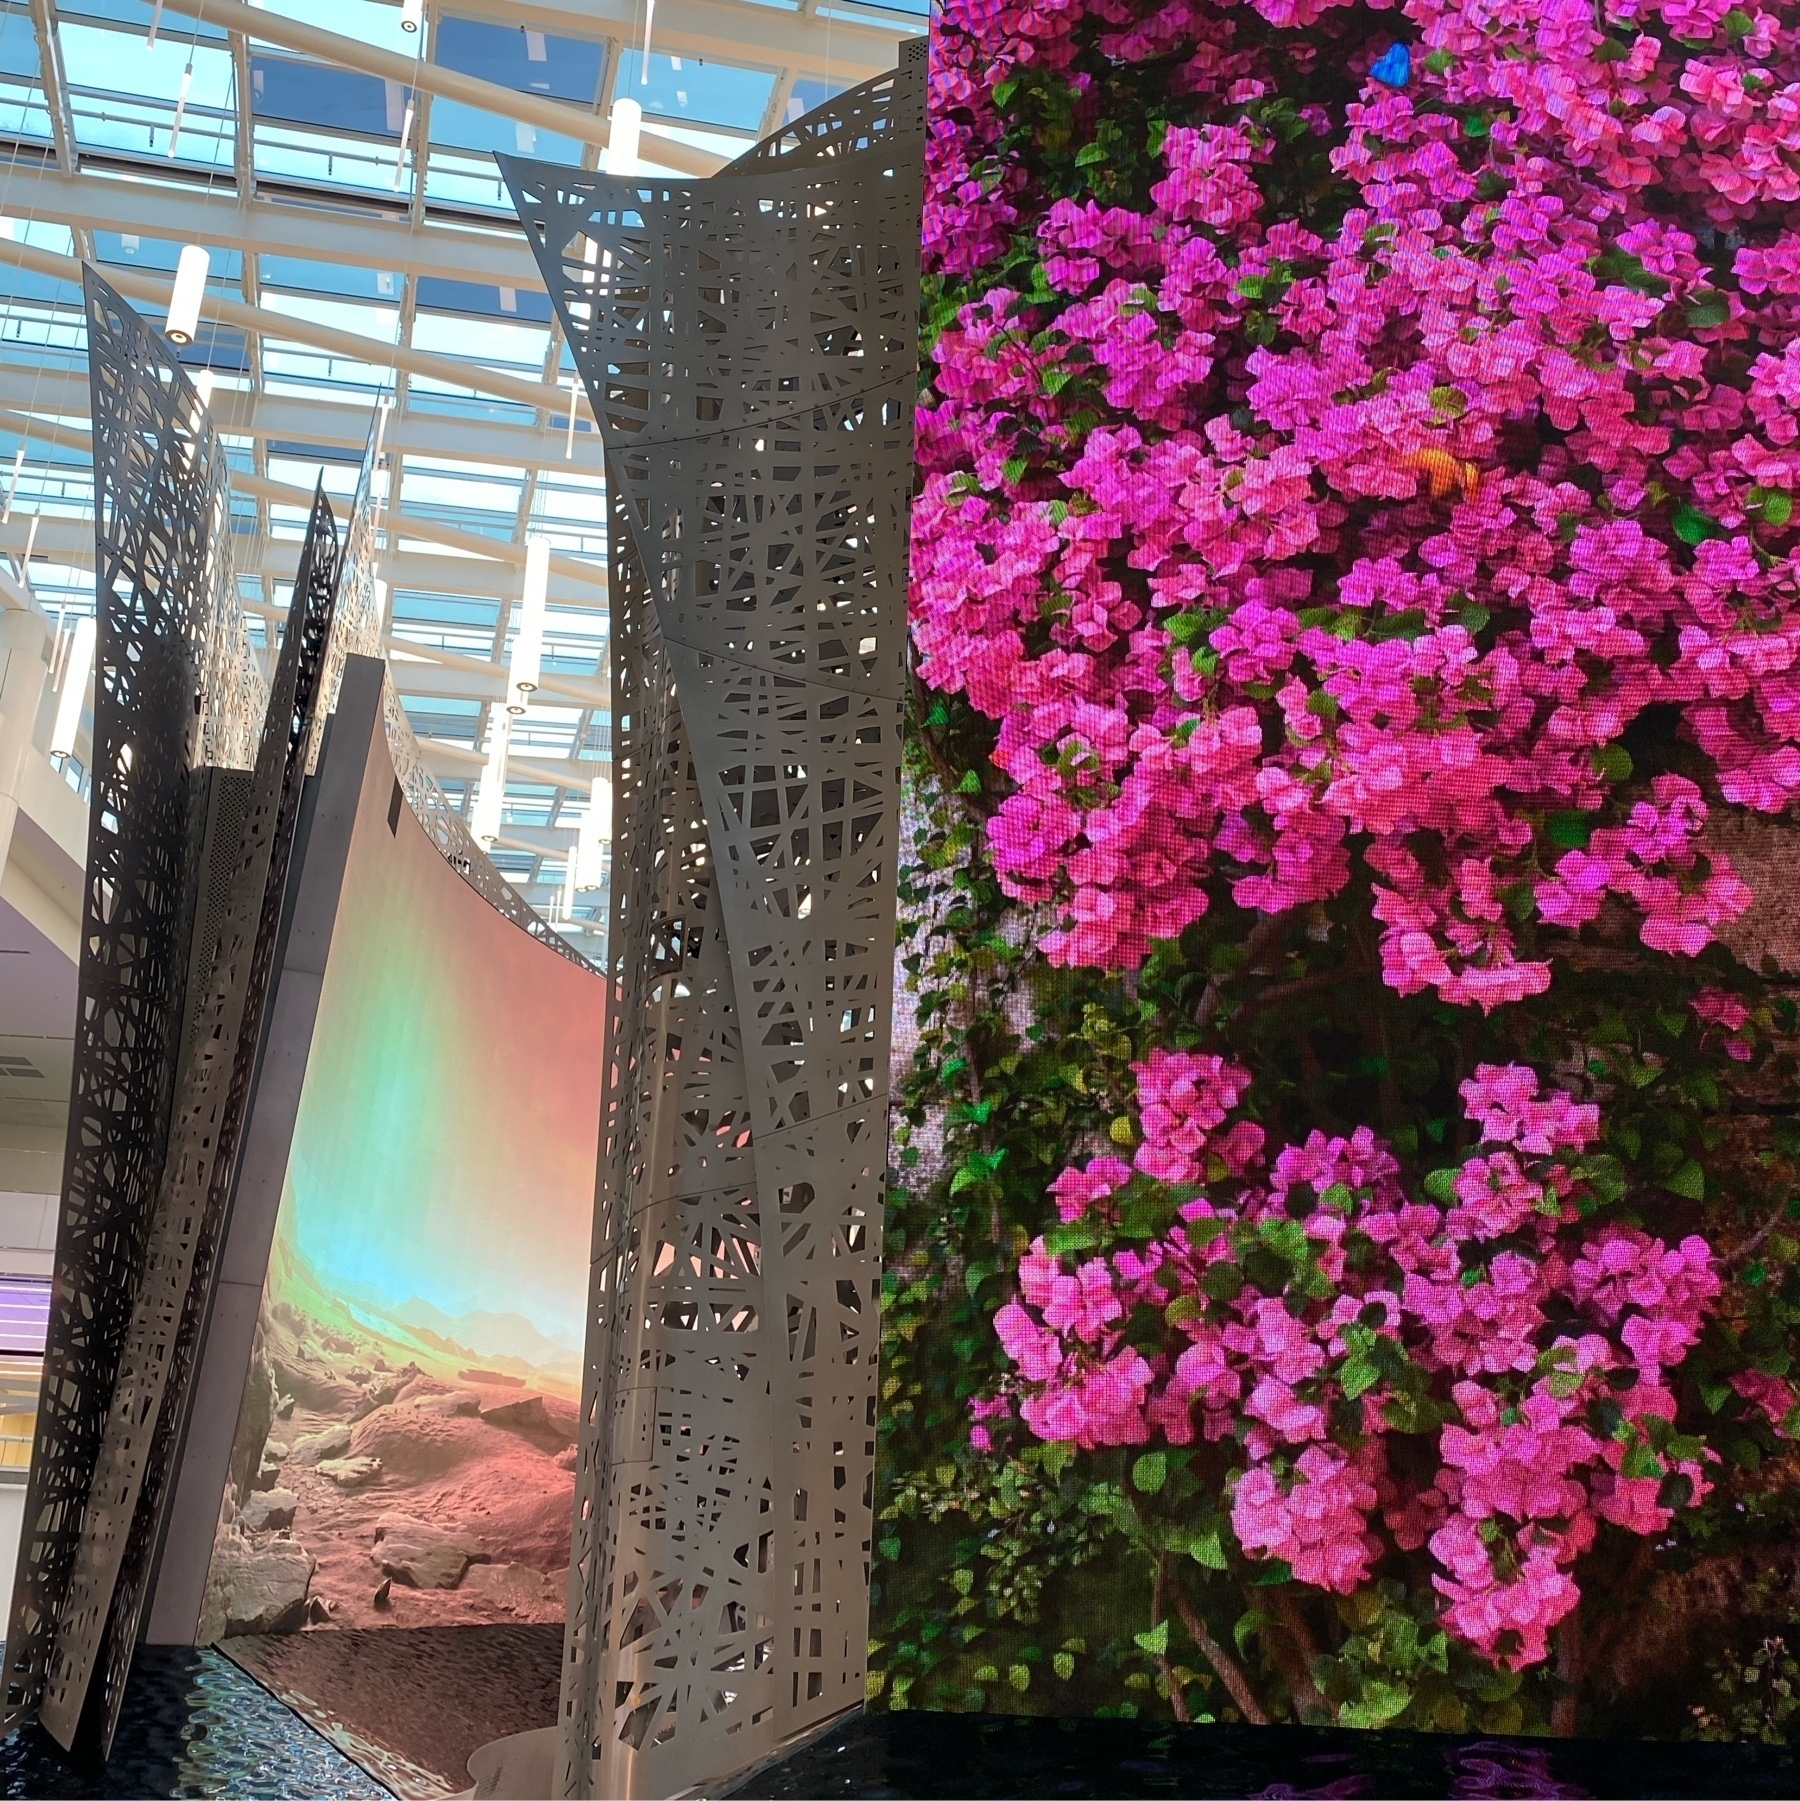 Video display screens showing a wall covered in flowers amd a sunrise desert.